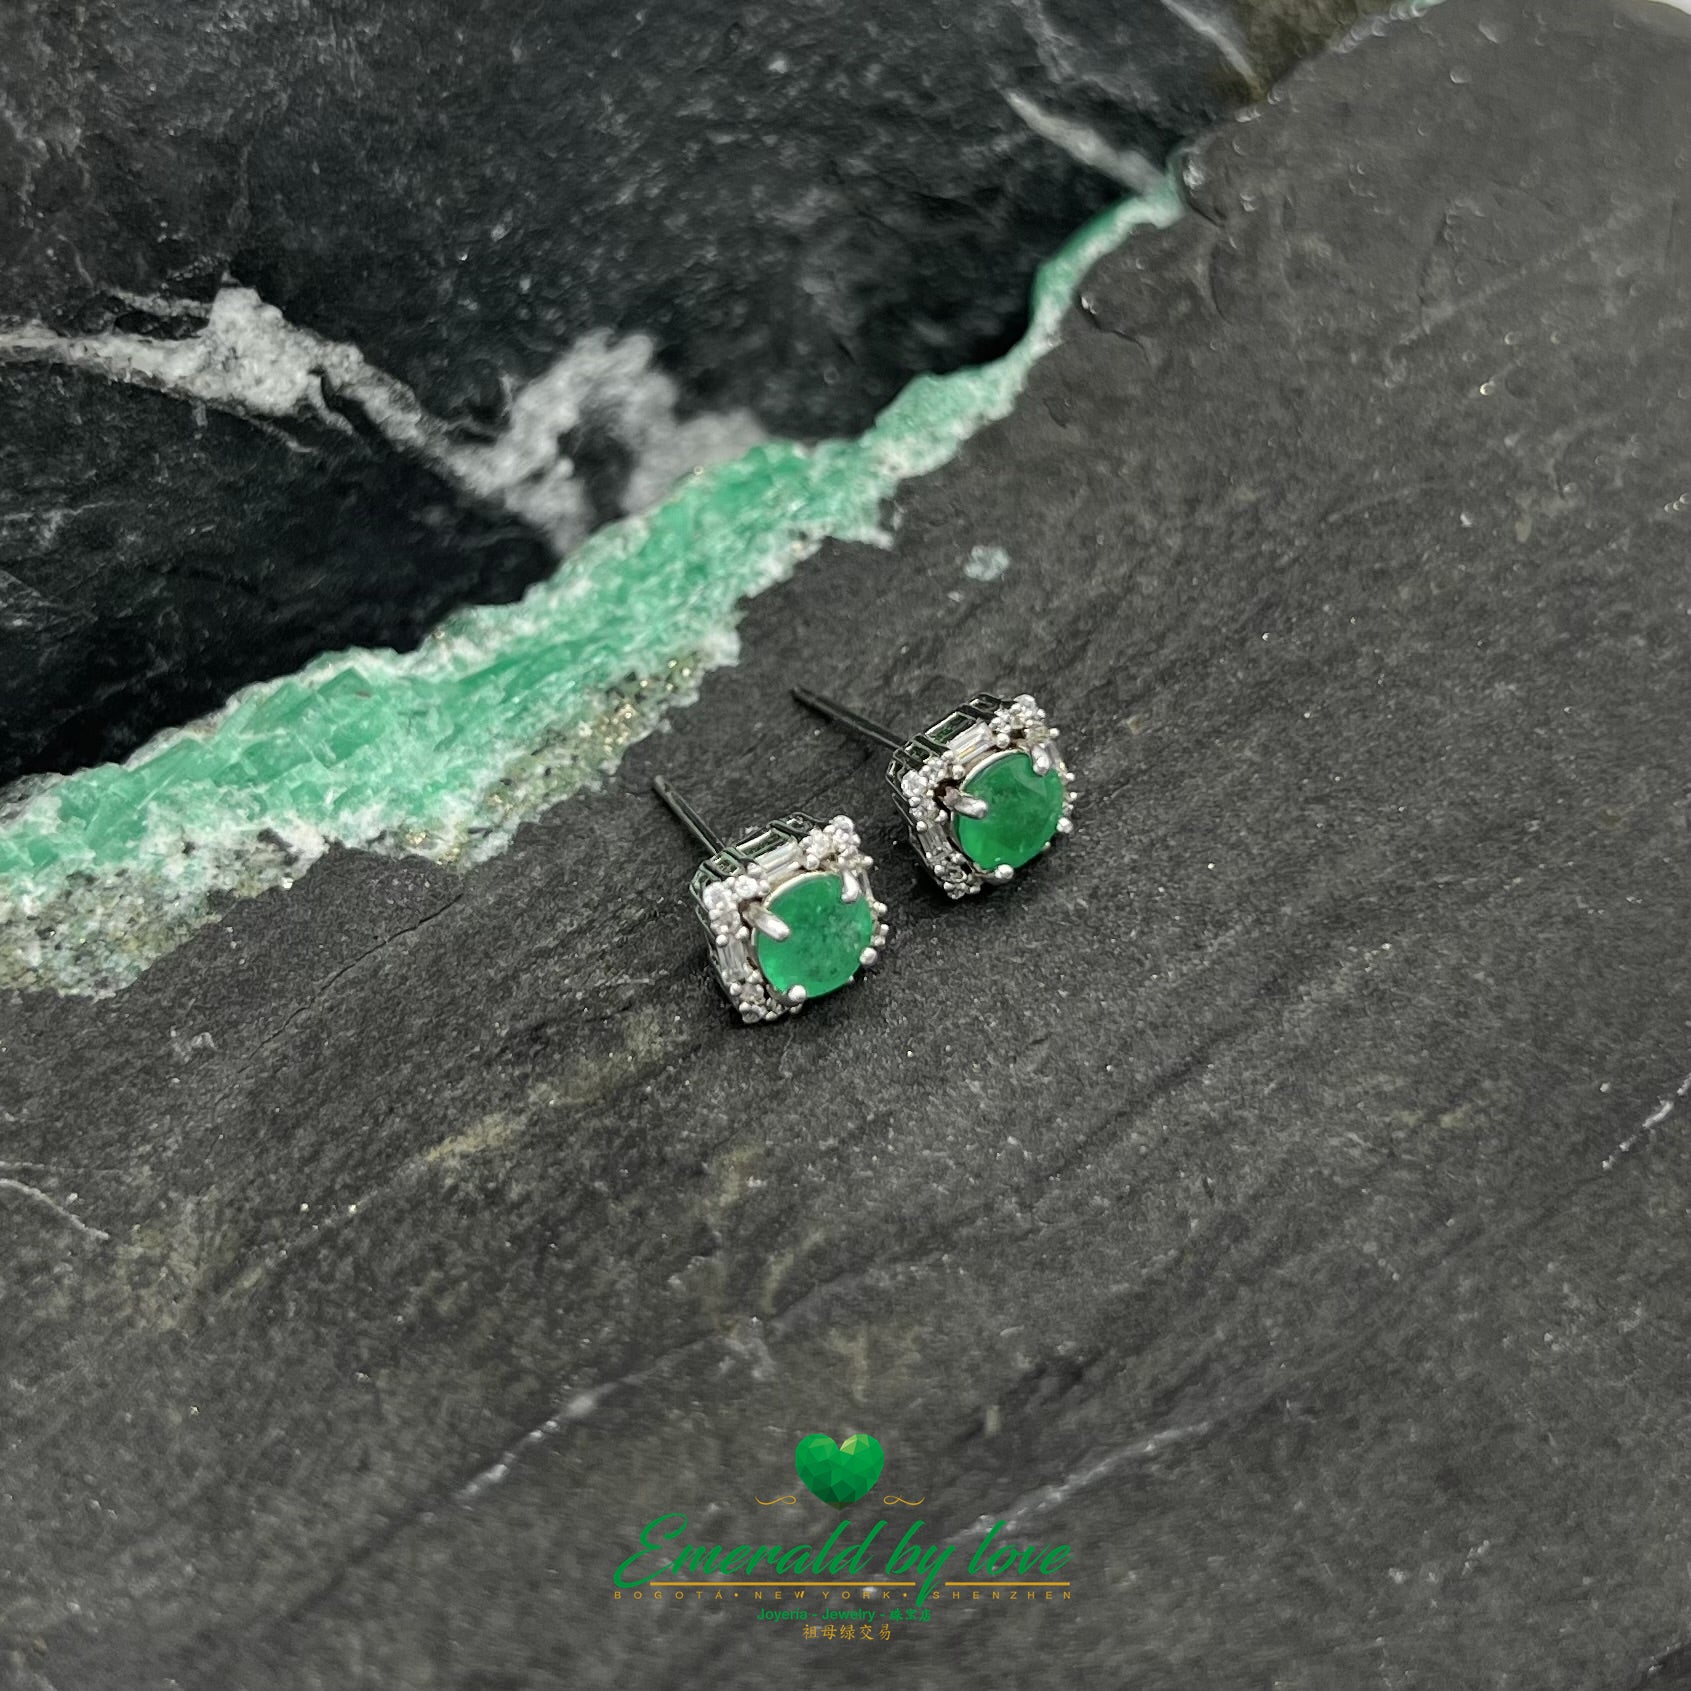 Square Sterling Silver Stud Earrings with Round Emerald Held by Four Prongs